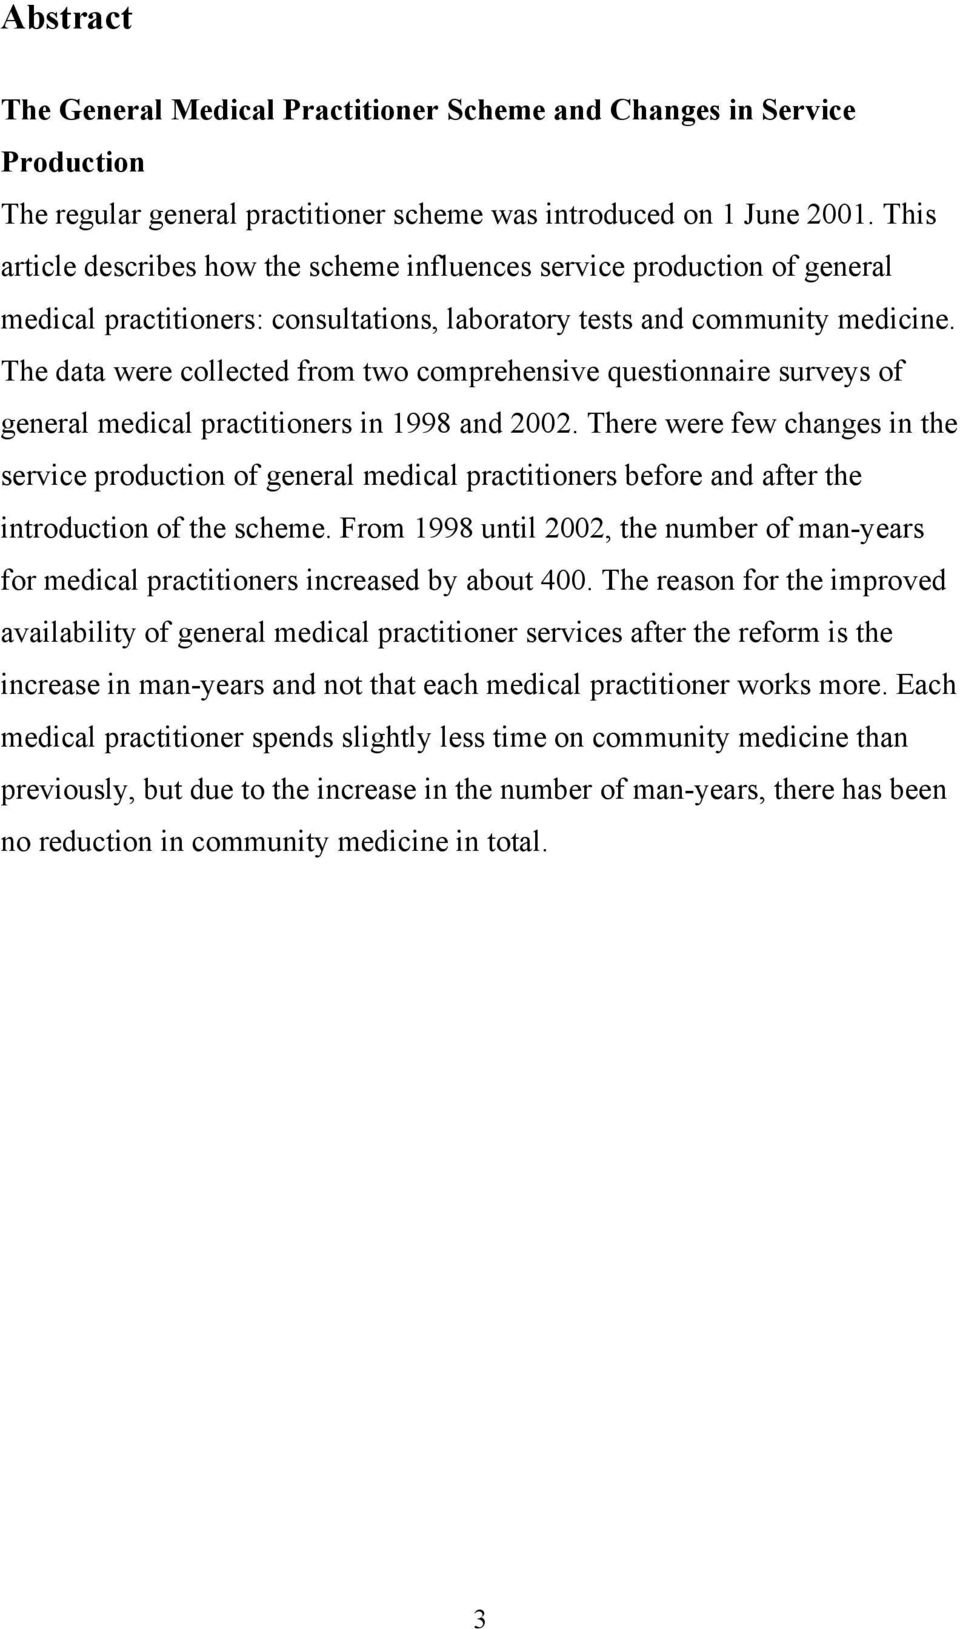 The data were collected from two comprehensive questionnaire surveys of general medical practitioners in 1998 and 2002.